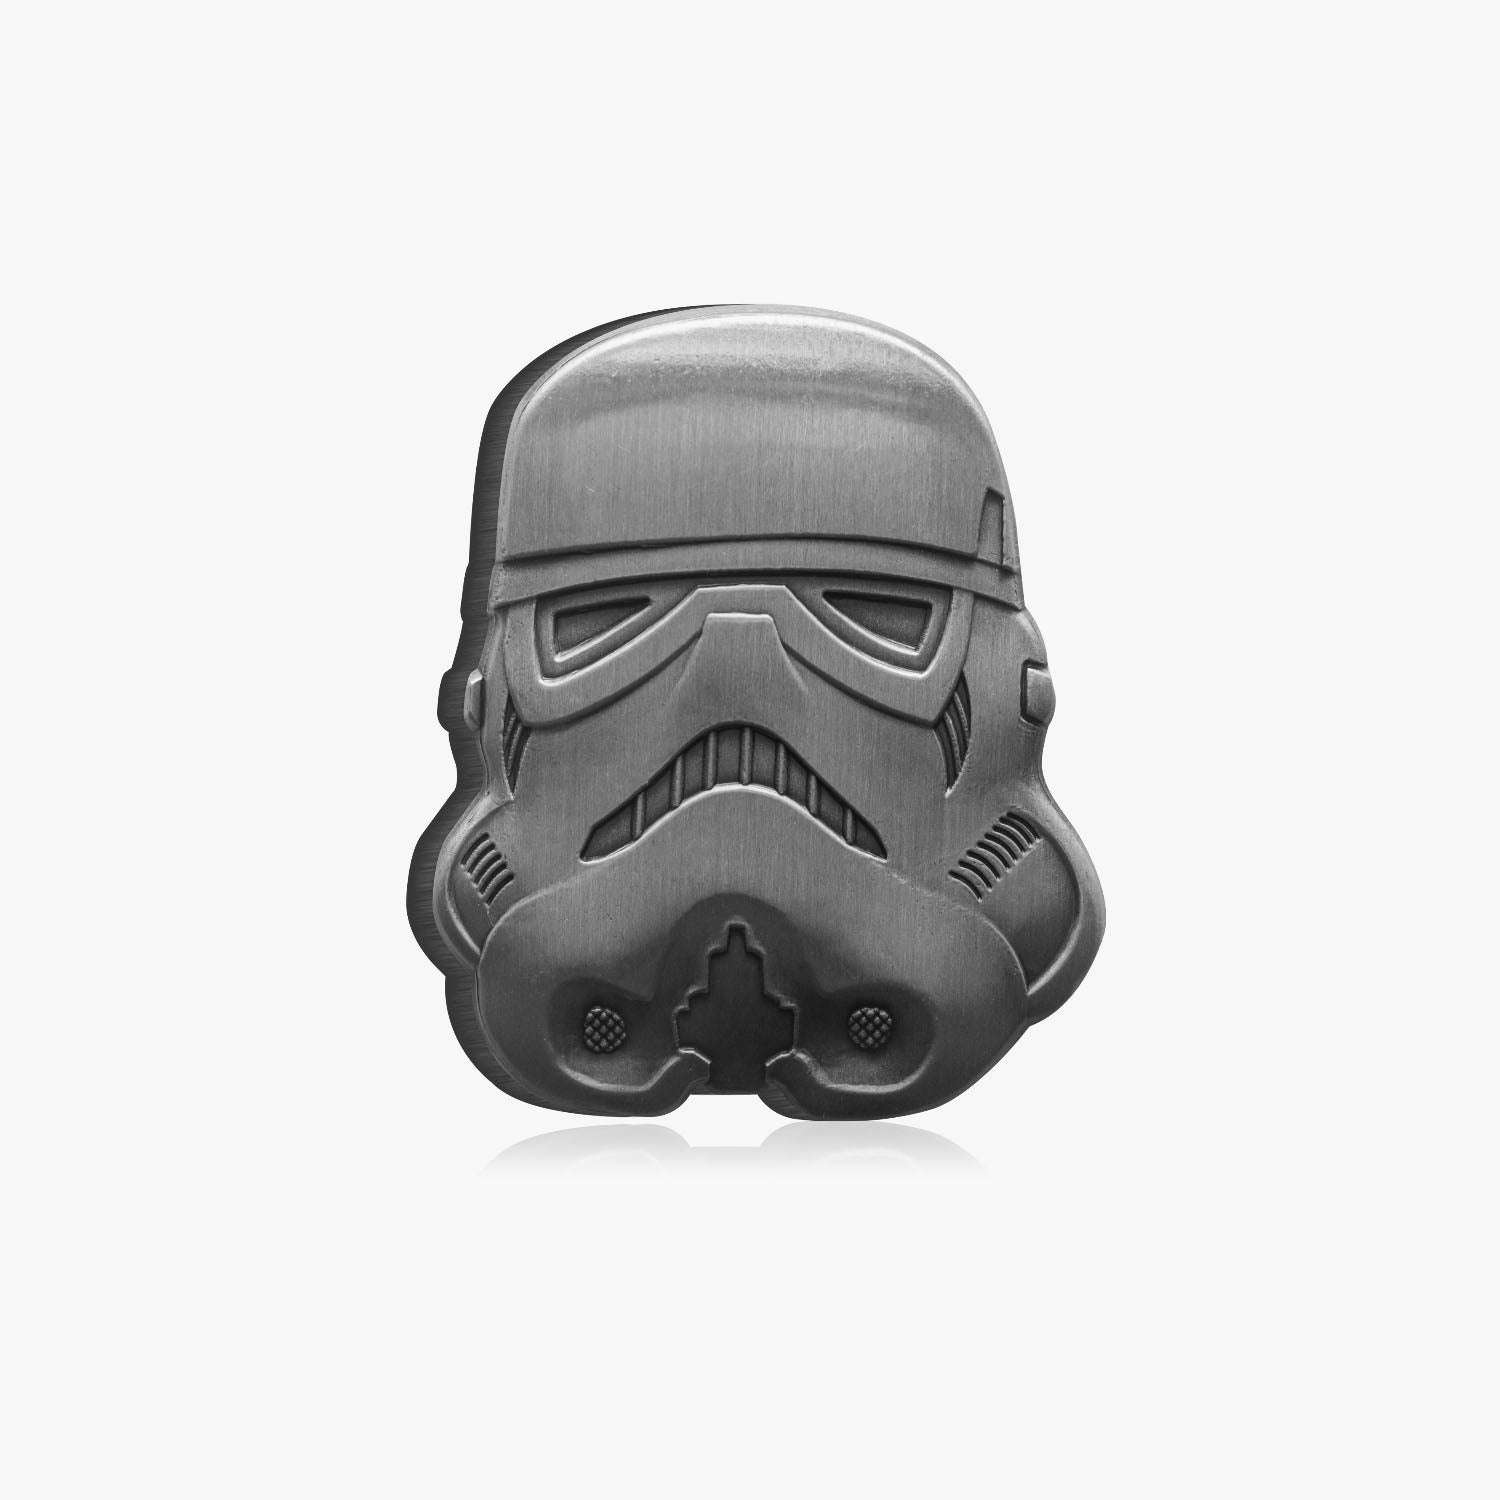 Official Star Wars Storm Trooper Shaped Commemorative